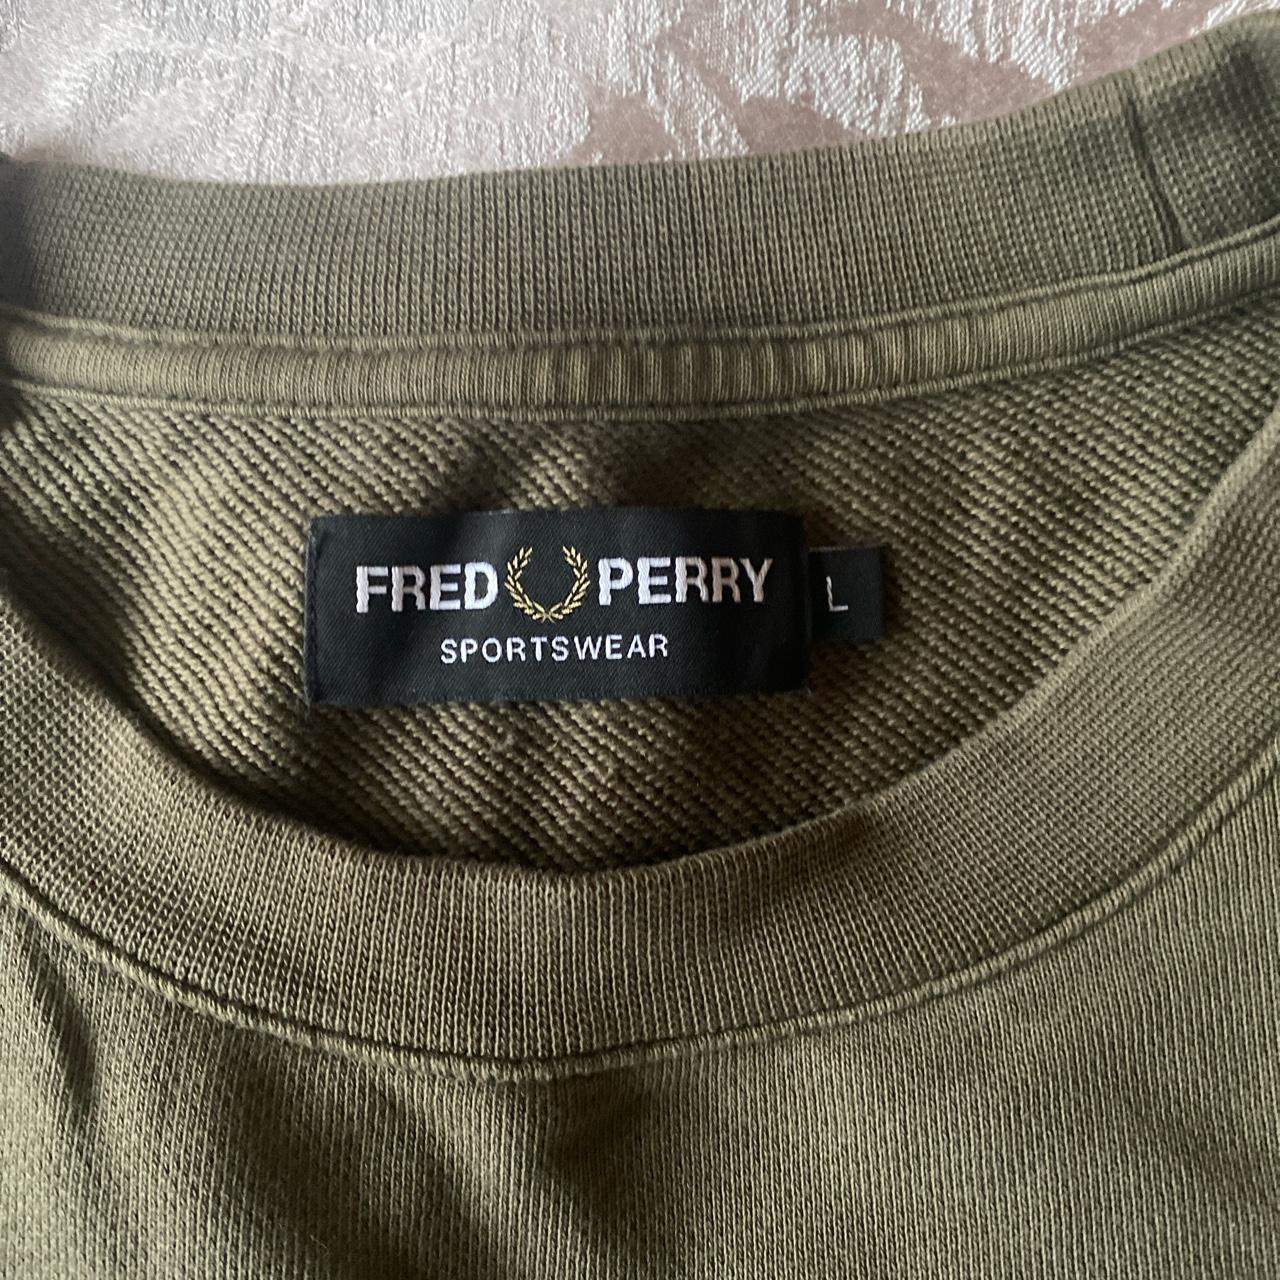 Fred Perry Men's Khaki and Green Jumper | Depop